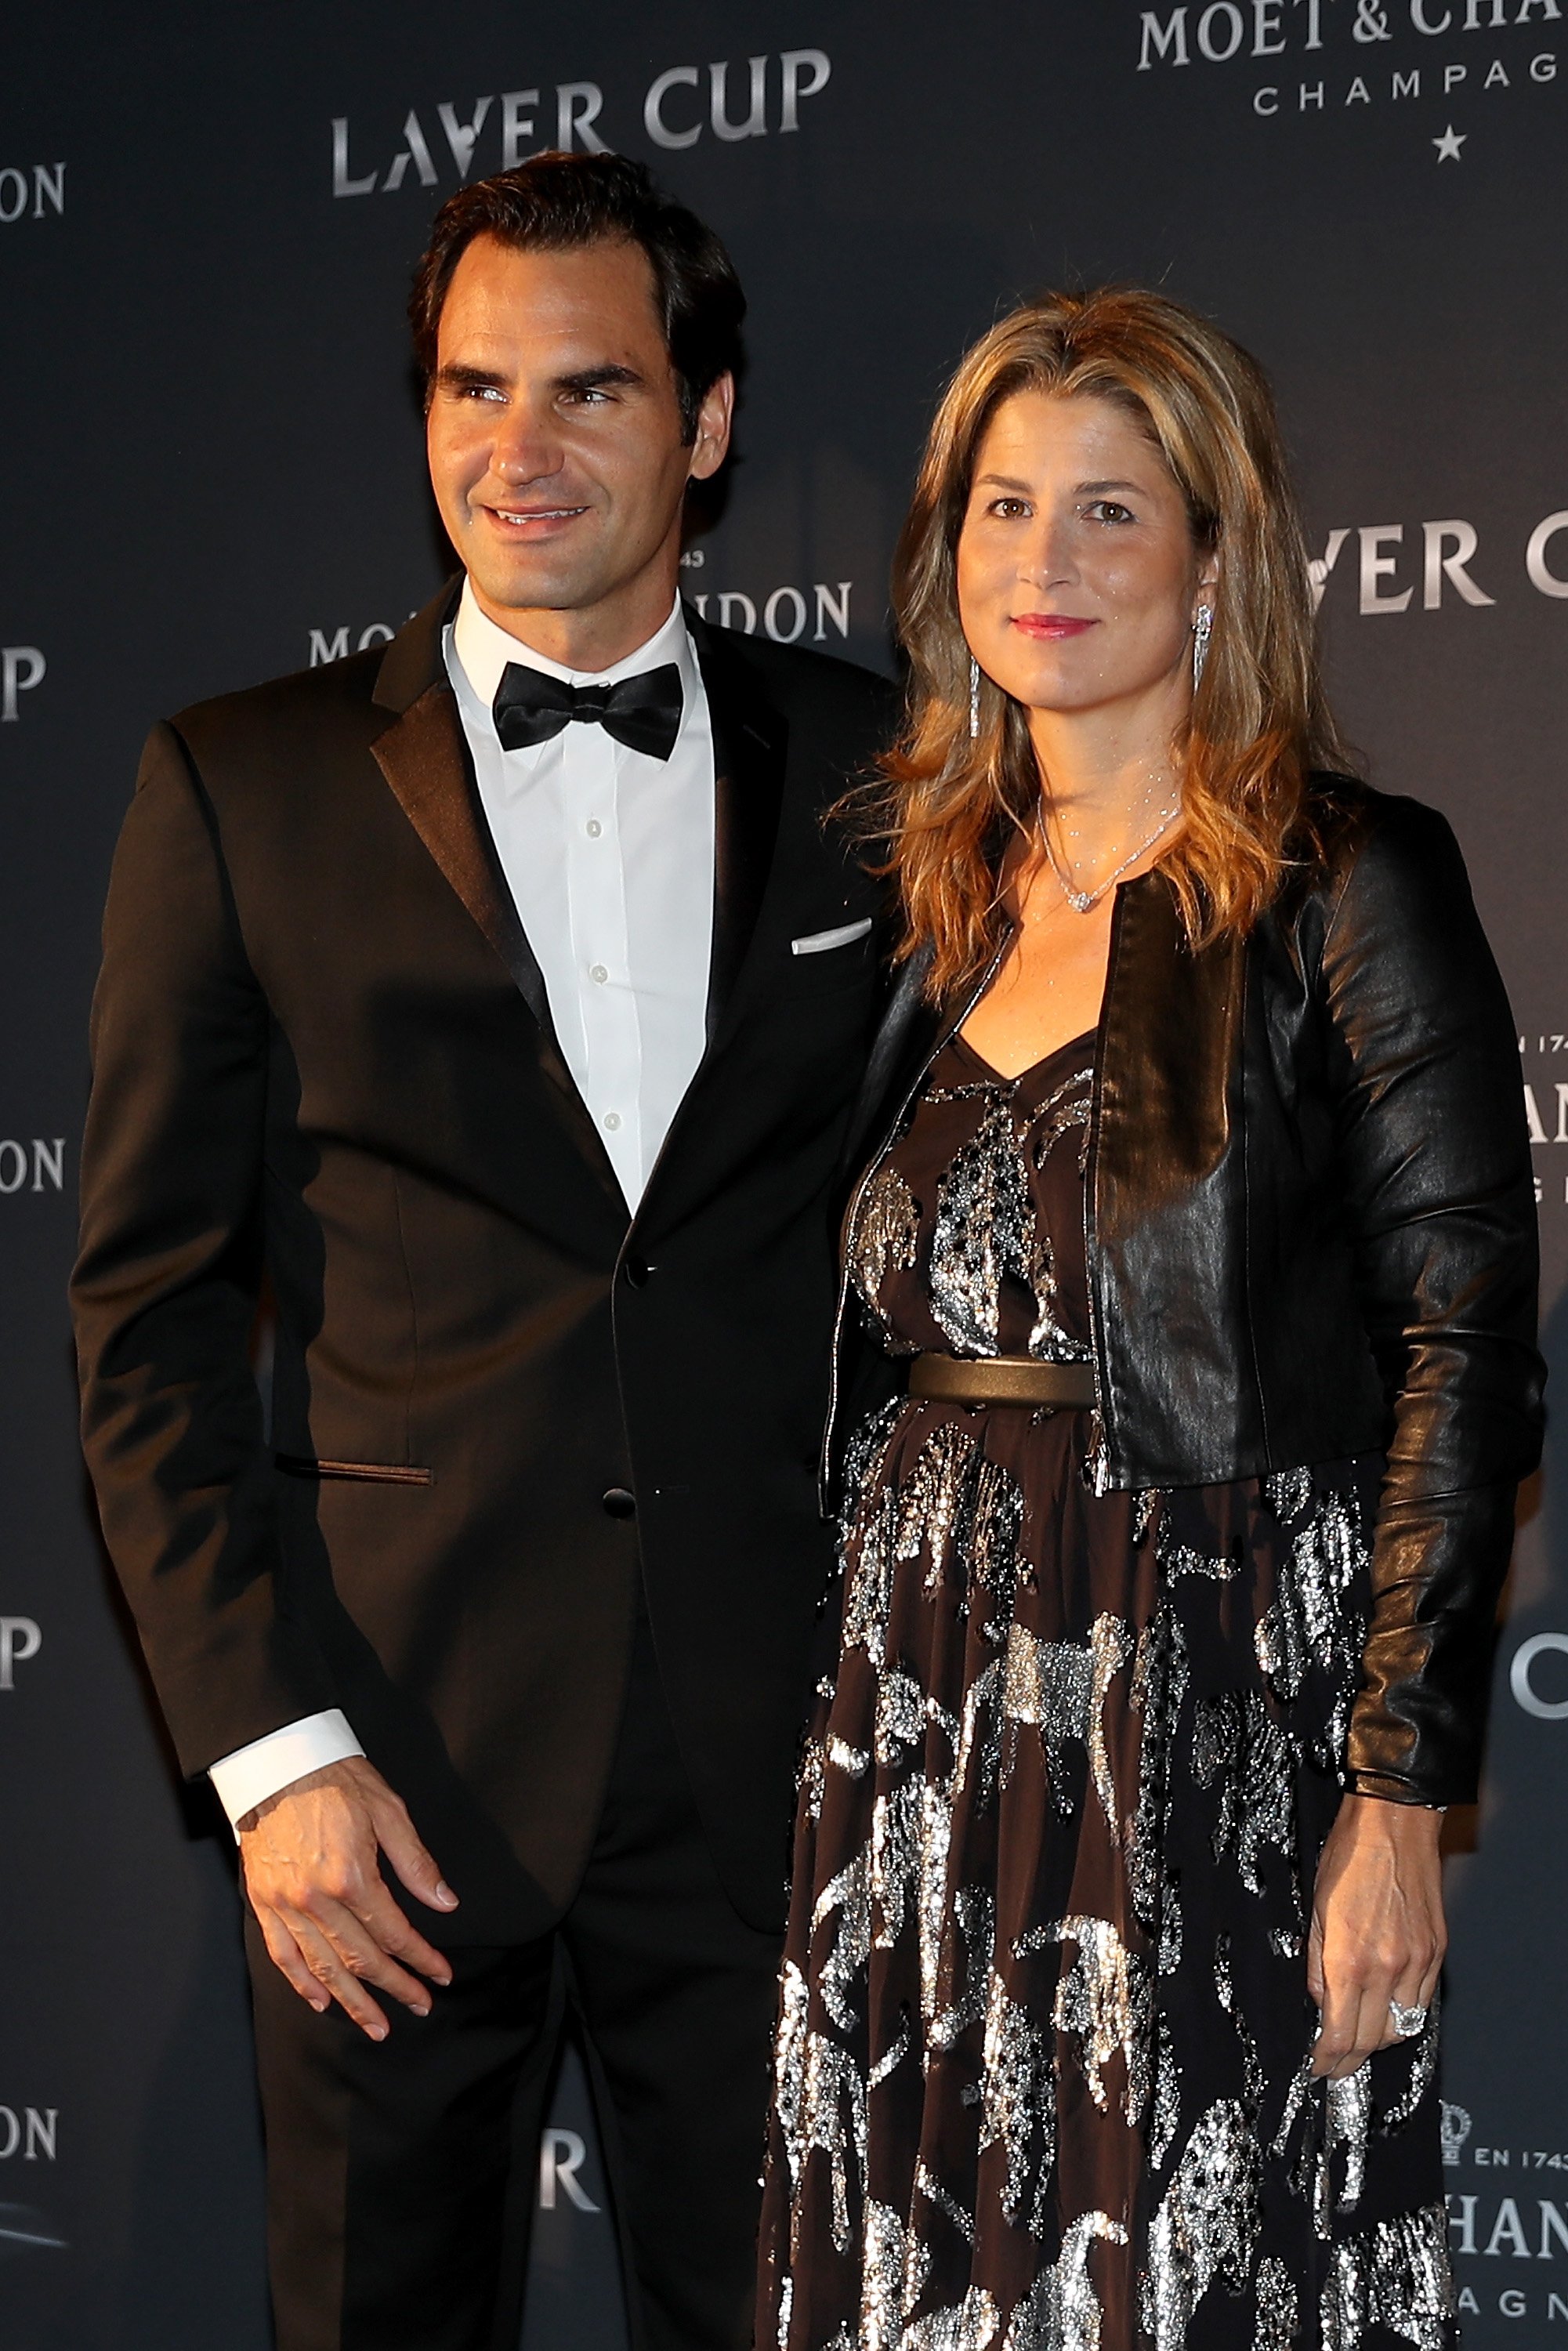 Roger Federer and spouse Mirka Federer arrive on the Black Carpet during the Laver Cup Gala on September 20, 2018 in Chicago, Illinois. | Source: Getty Images